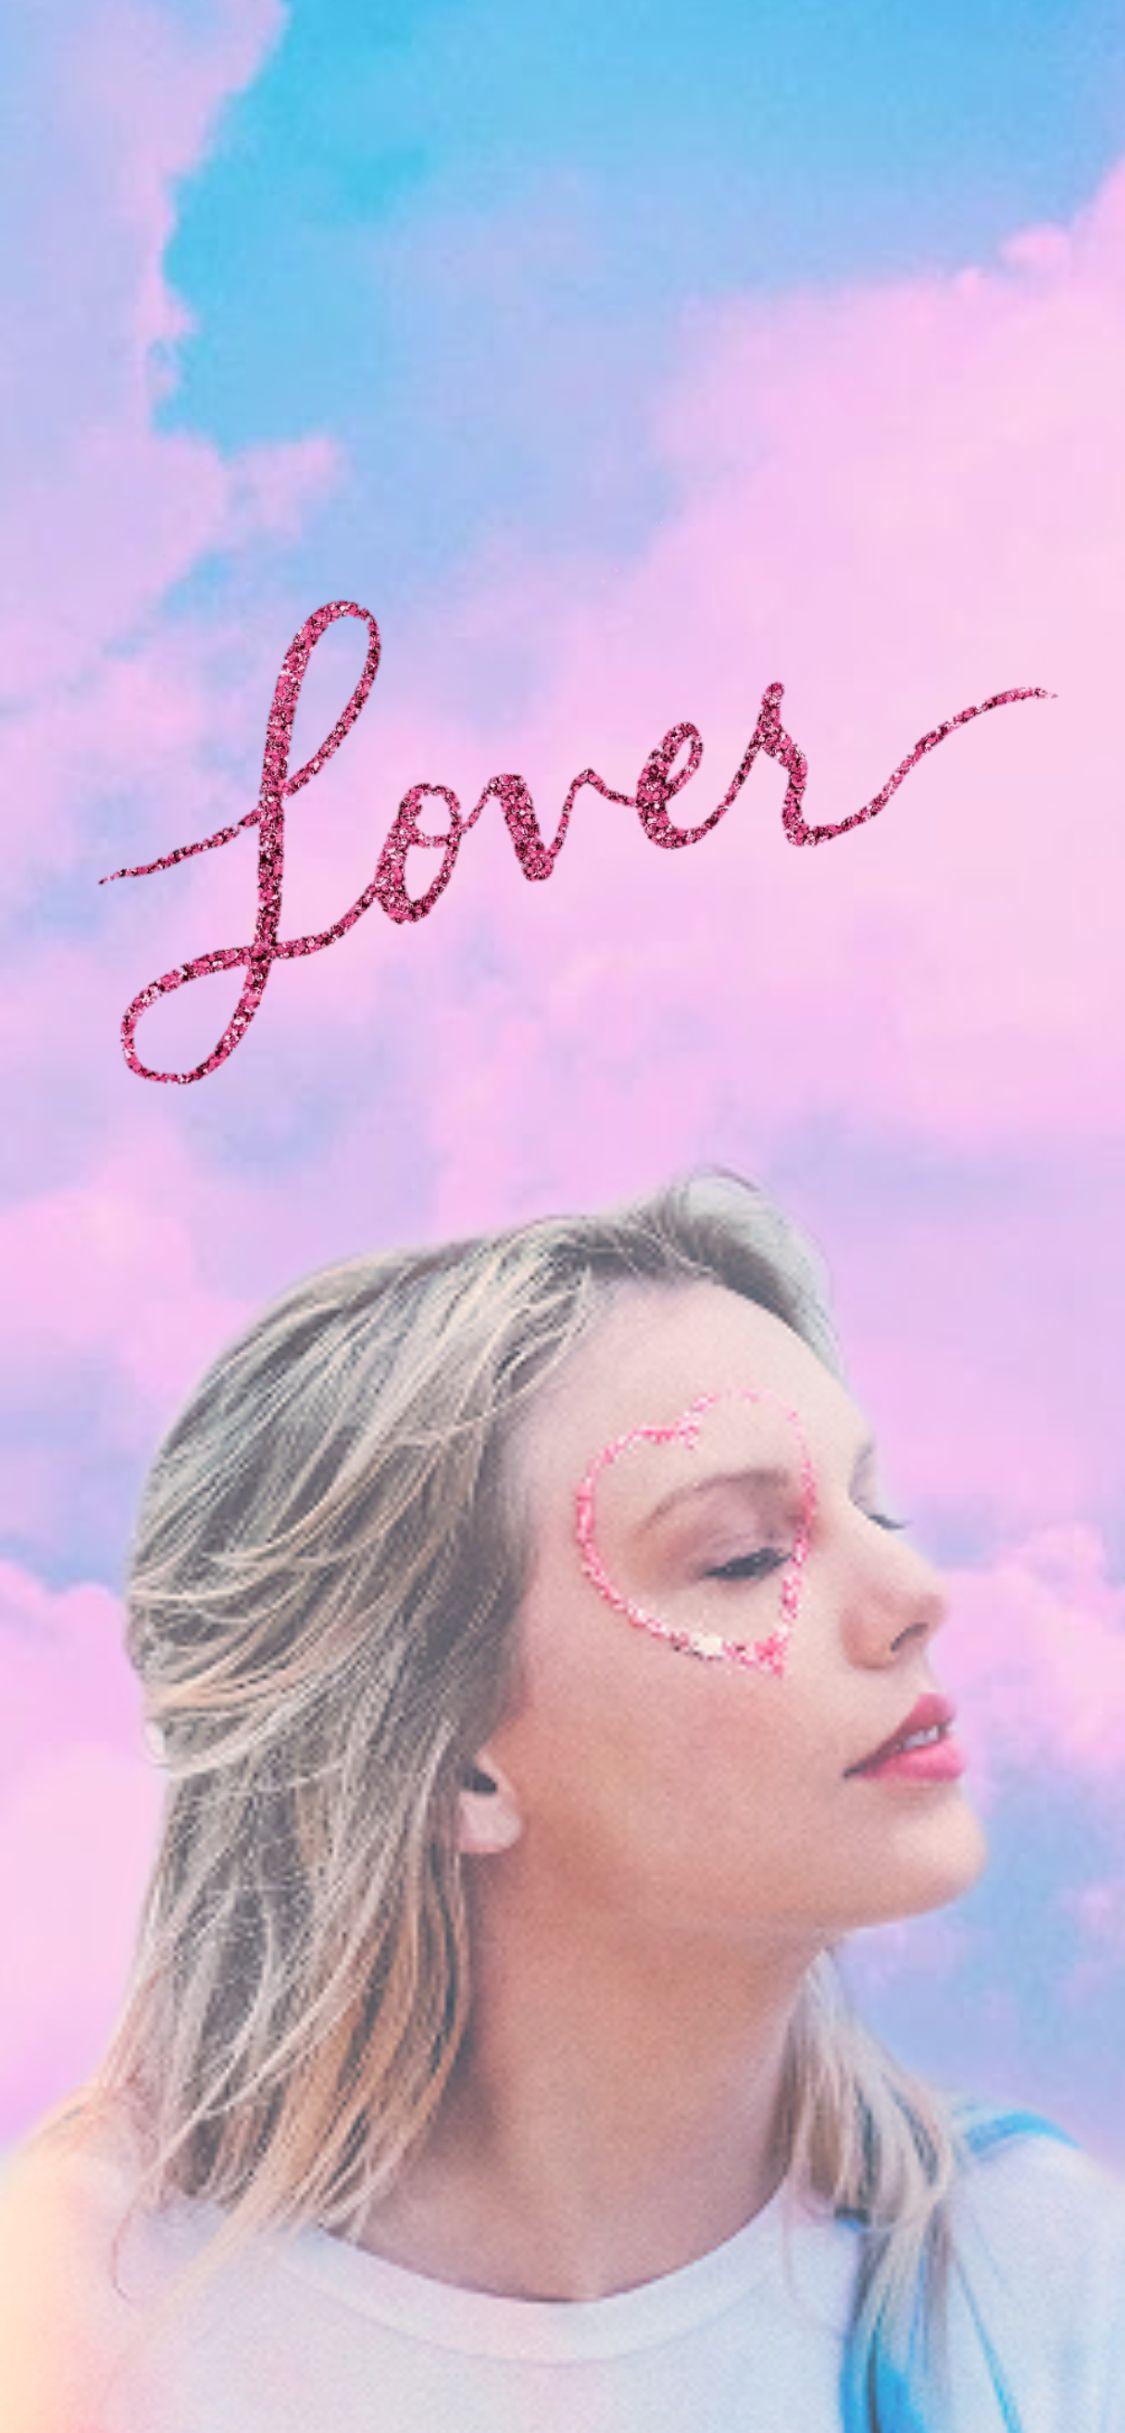 Taylor Swift Lover Wallpapers Top Free Taylor Swift Lover Backgrounds Wallpaperaccess